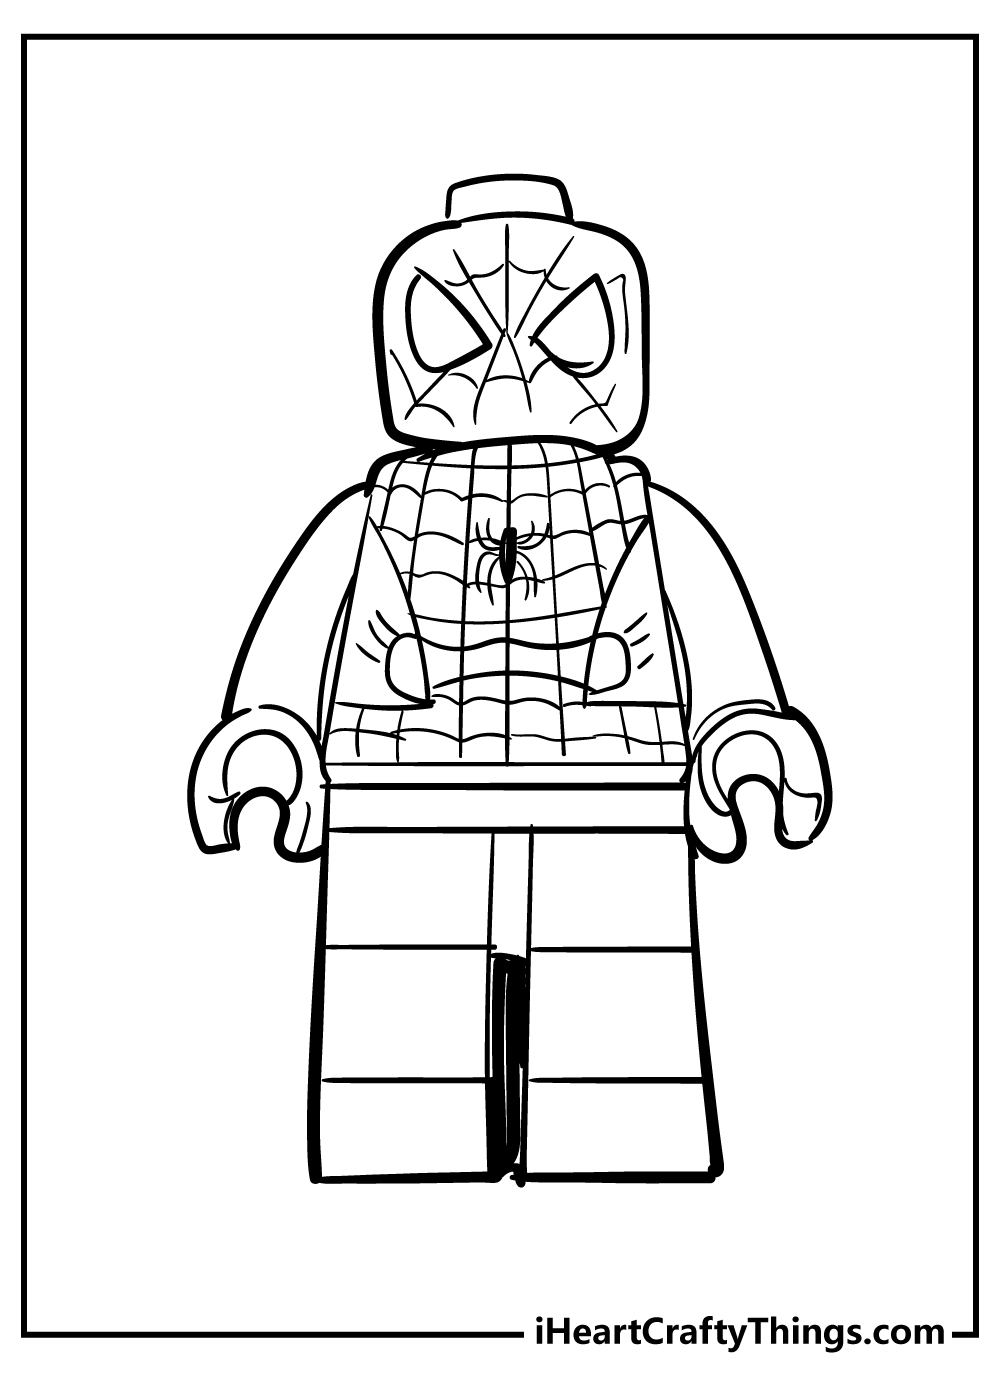 Printable Lego Avengers Coloring Pages Updated 20